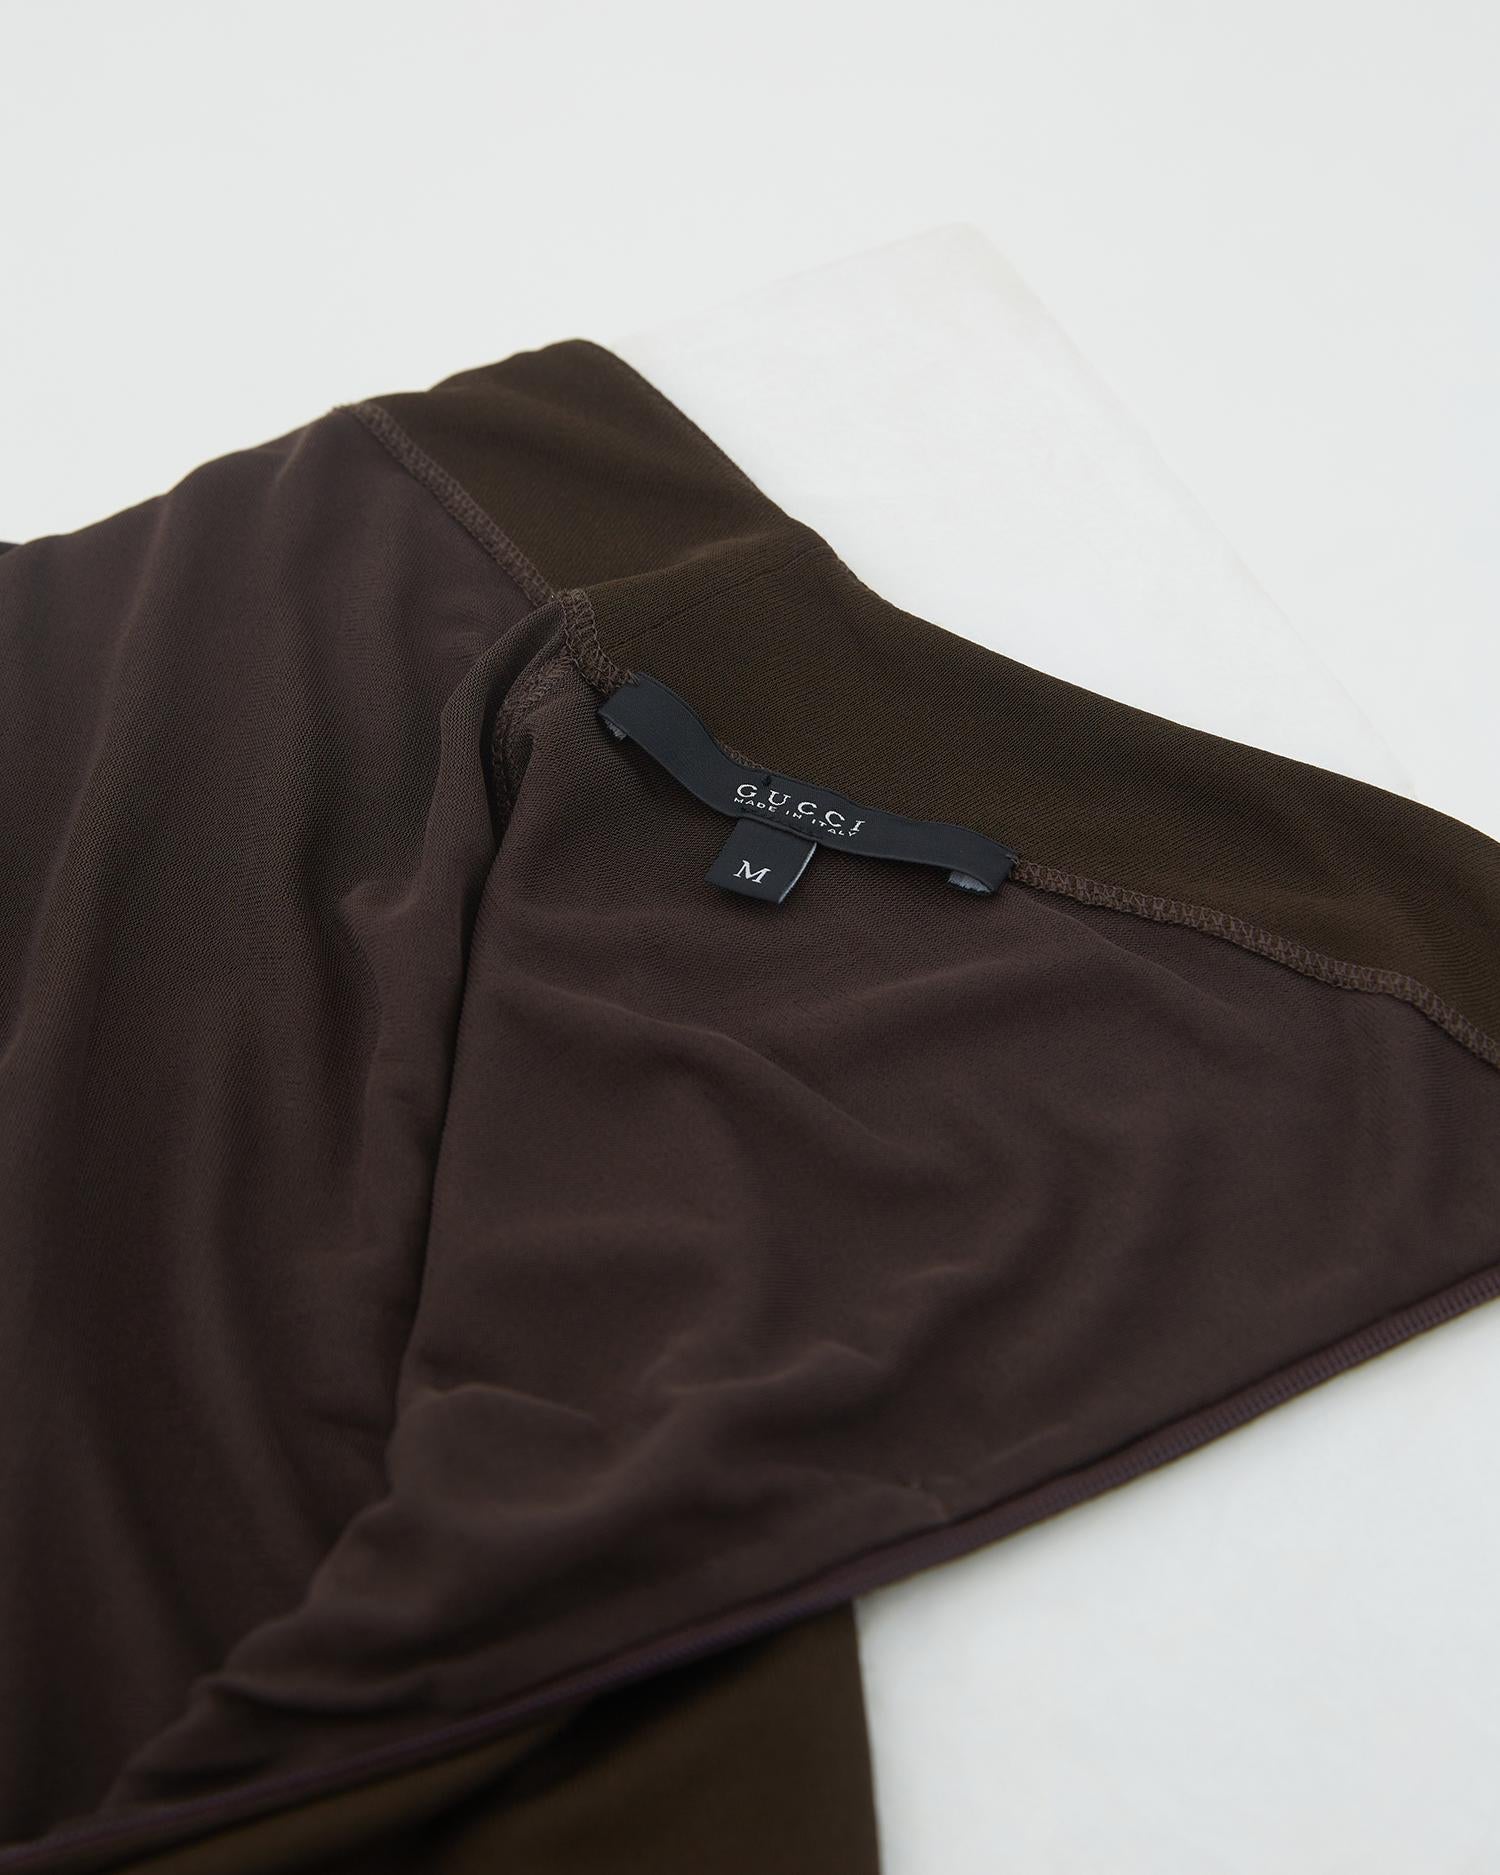 Women's Gucci by Tom Ford S/S 2006 Chocolate brown backless halter bamboo cocktail dress For Sale